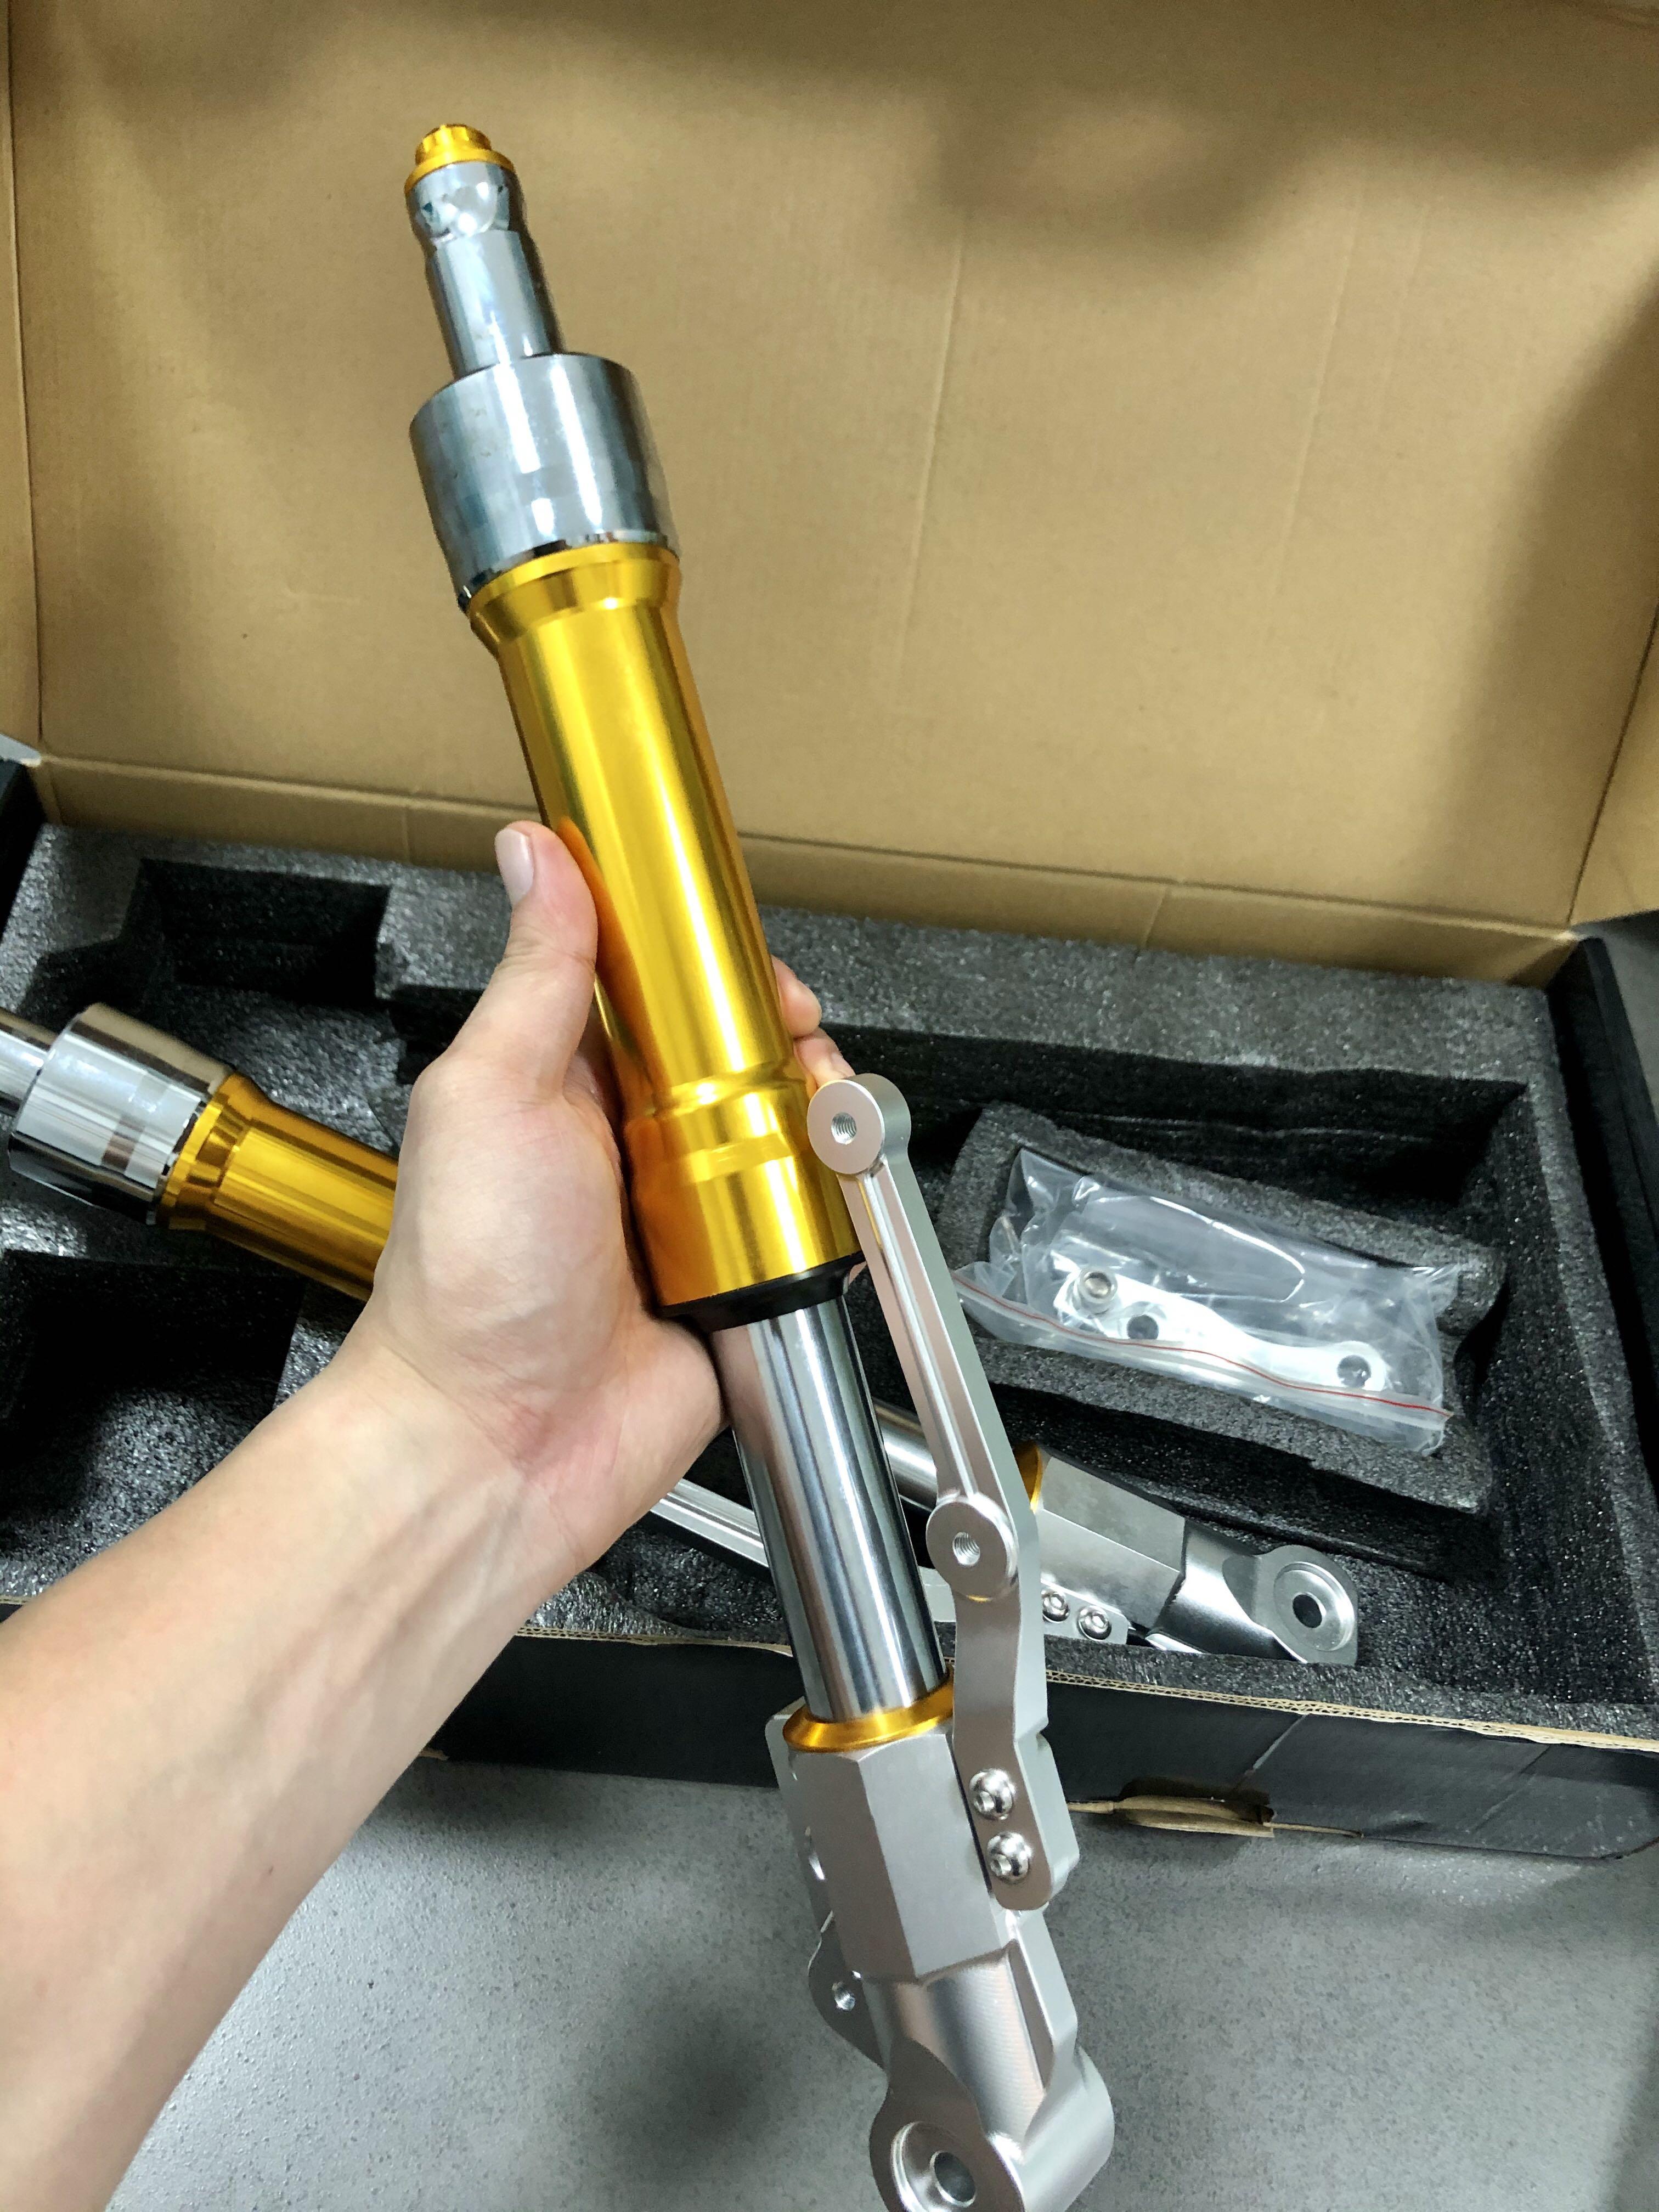  Aerox  155  USD Inverted Gold Fork  Ohlins Technology 